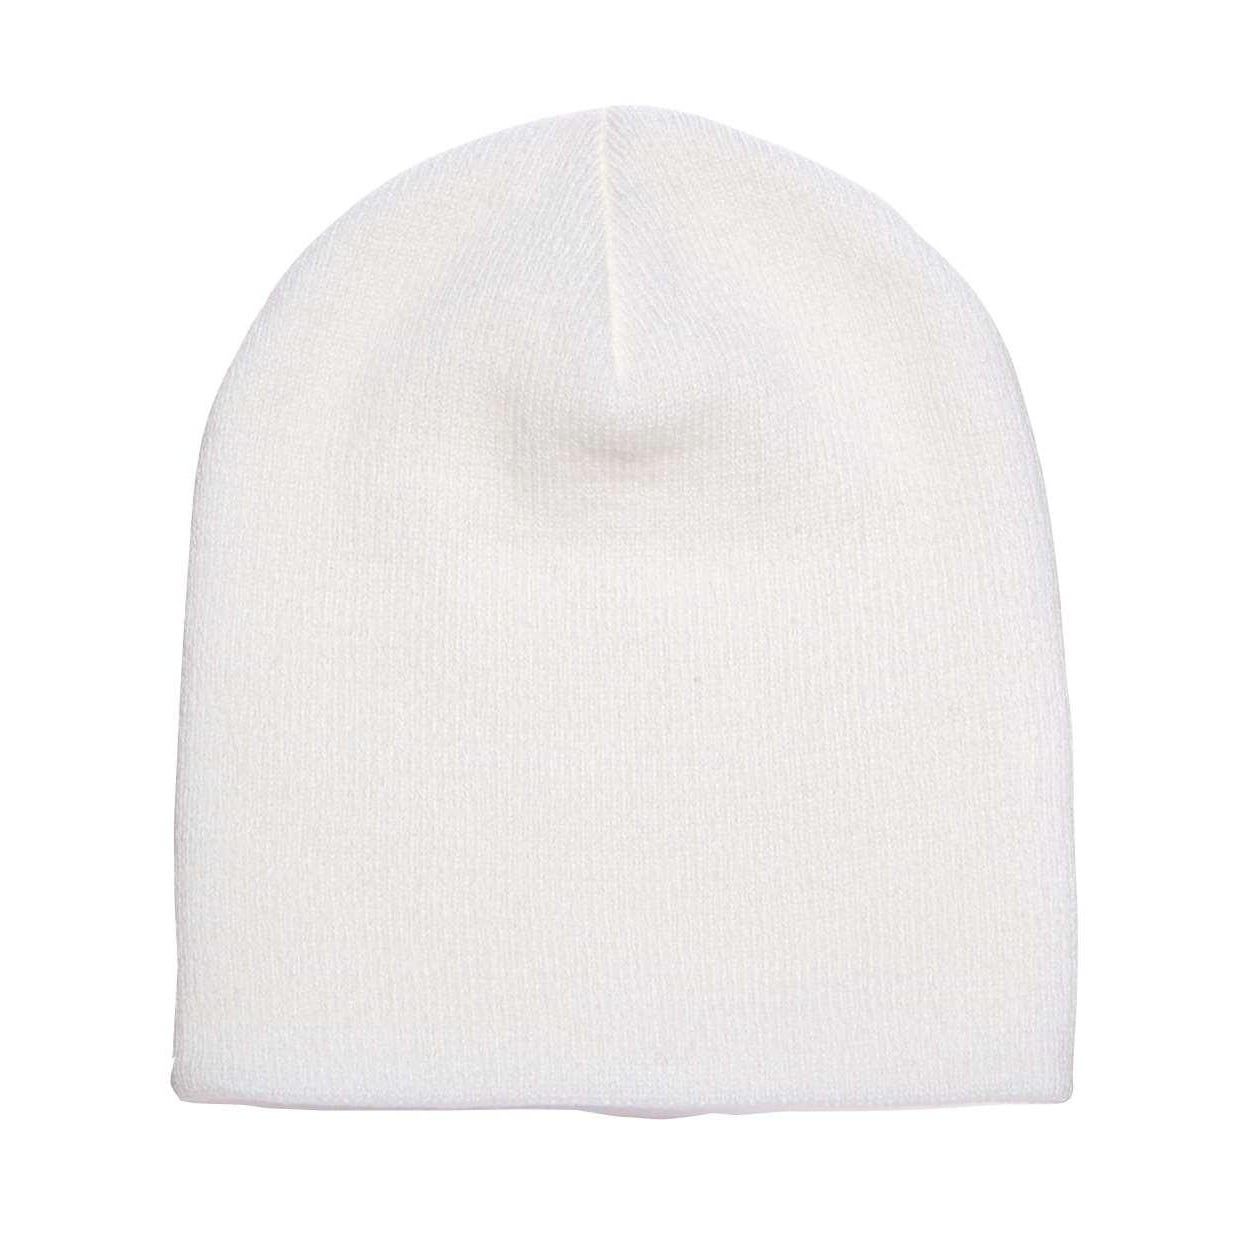 Beanie Knit Adult Yupoong 1500